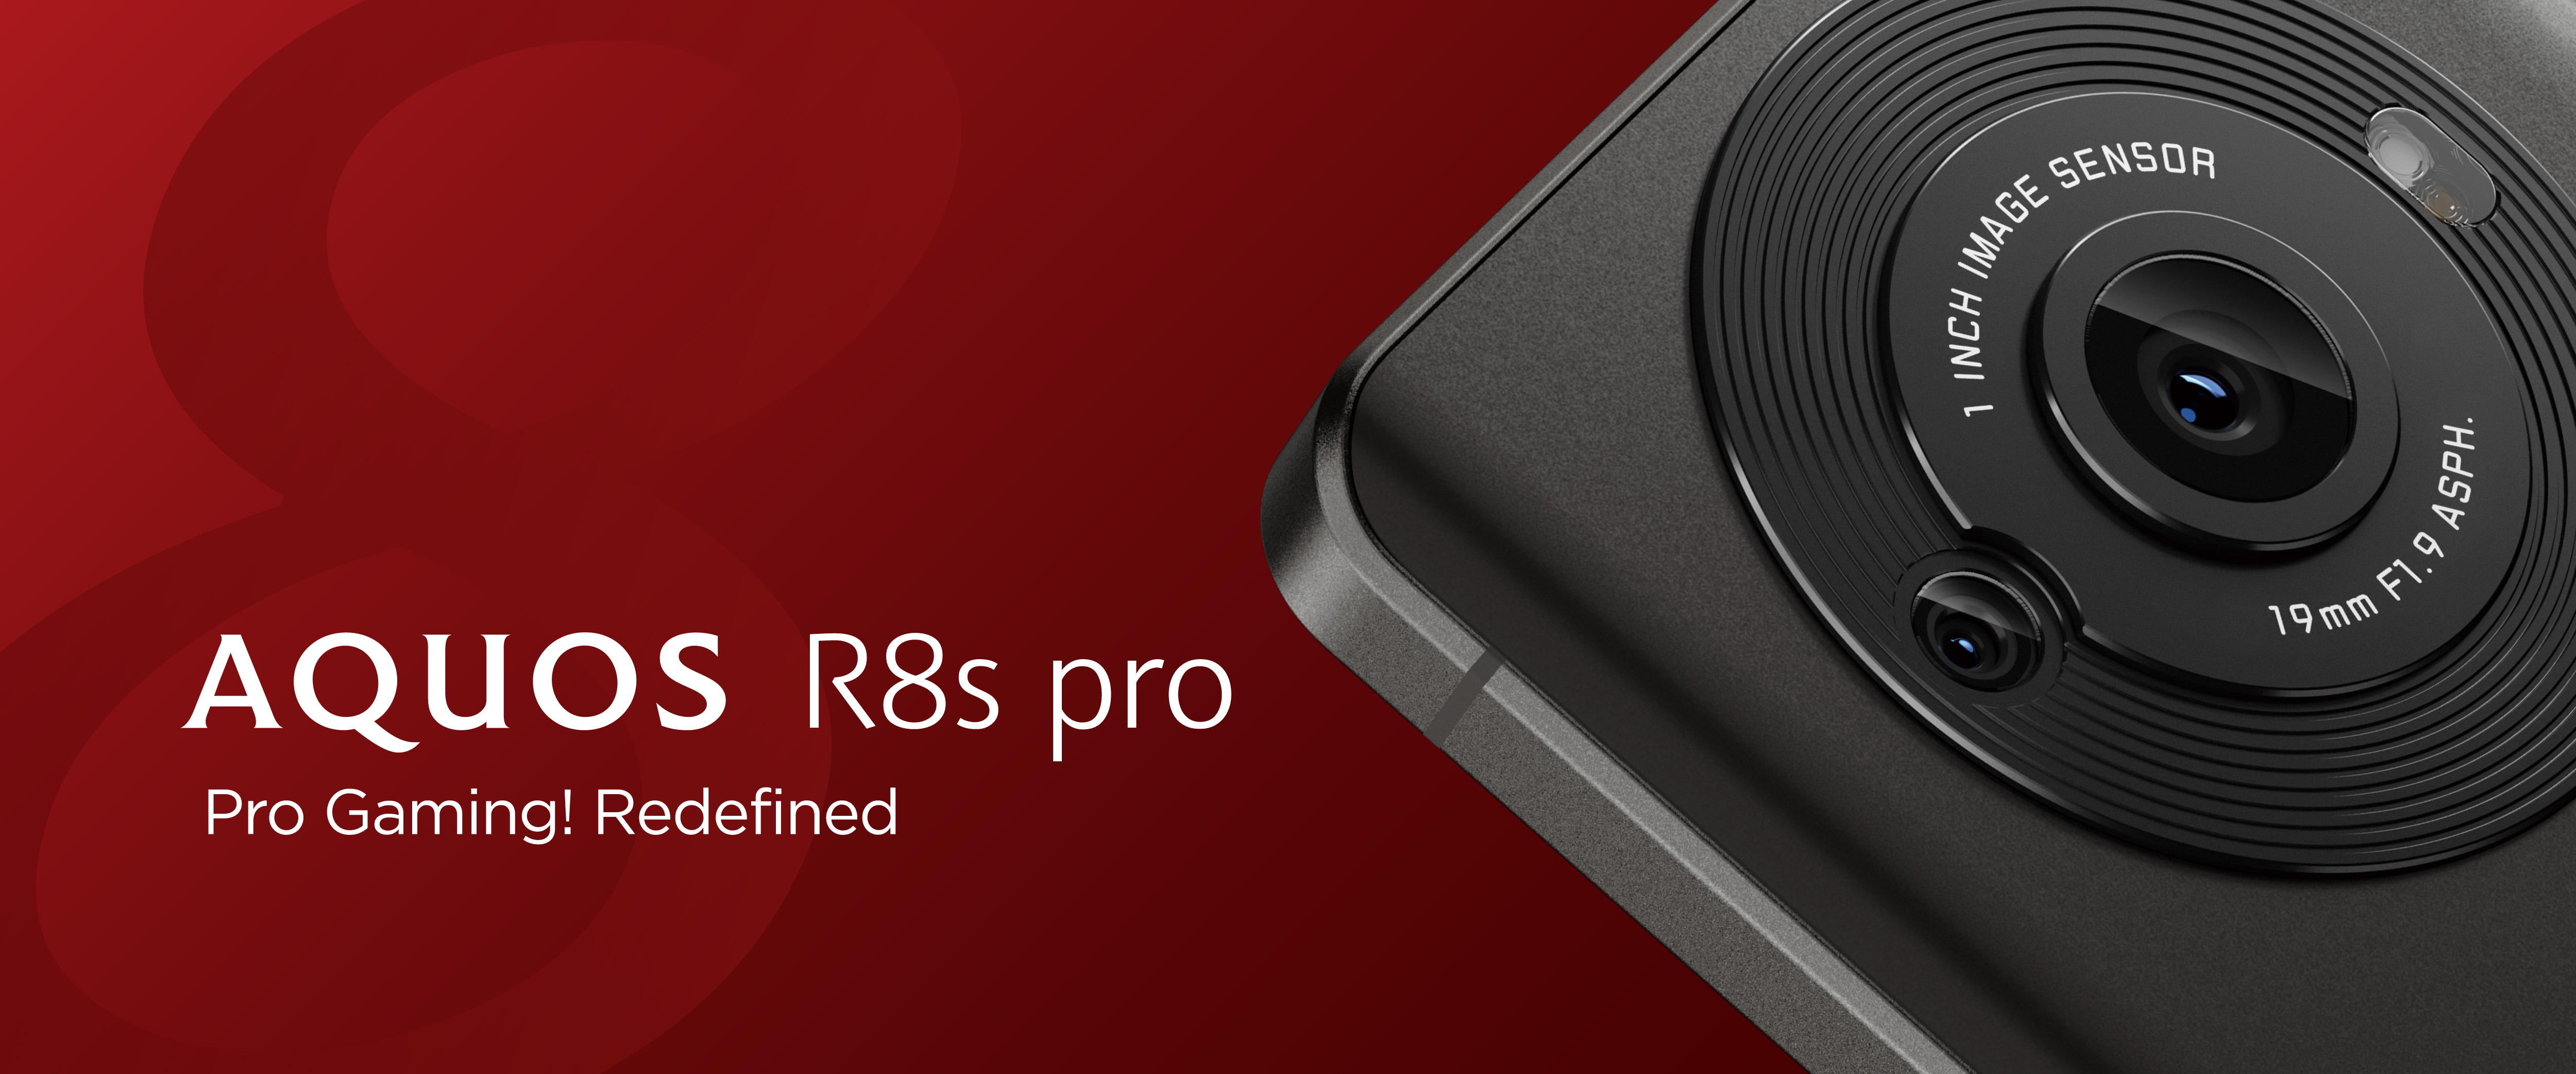 The AQUOS R8s pro boasts an excellent performance without overheating with its heat-releasing system